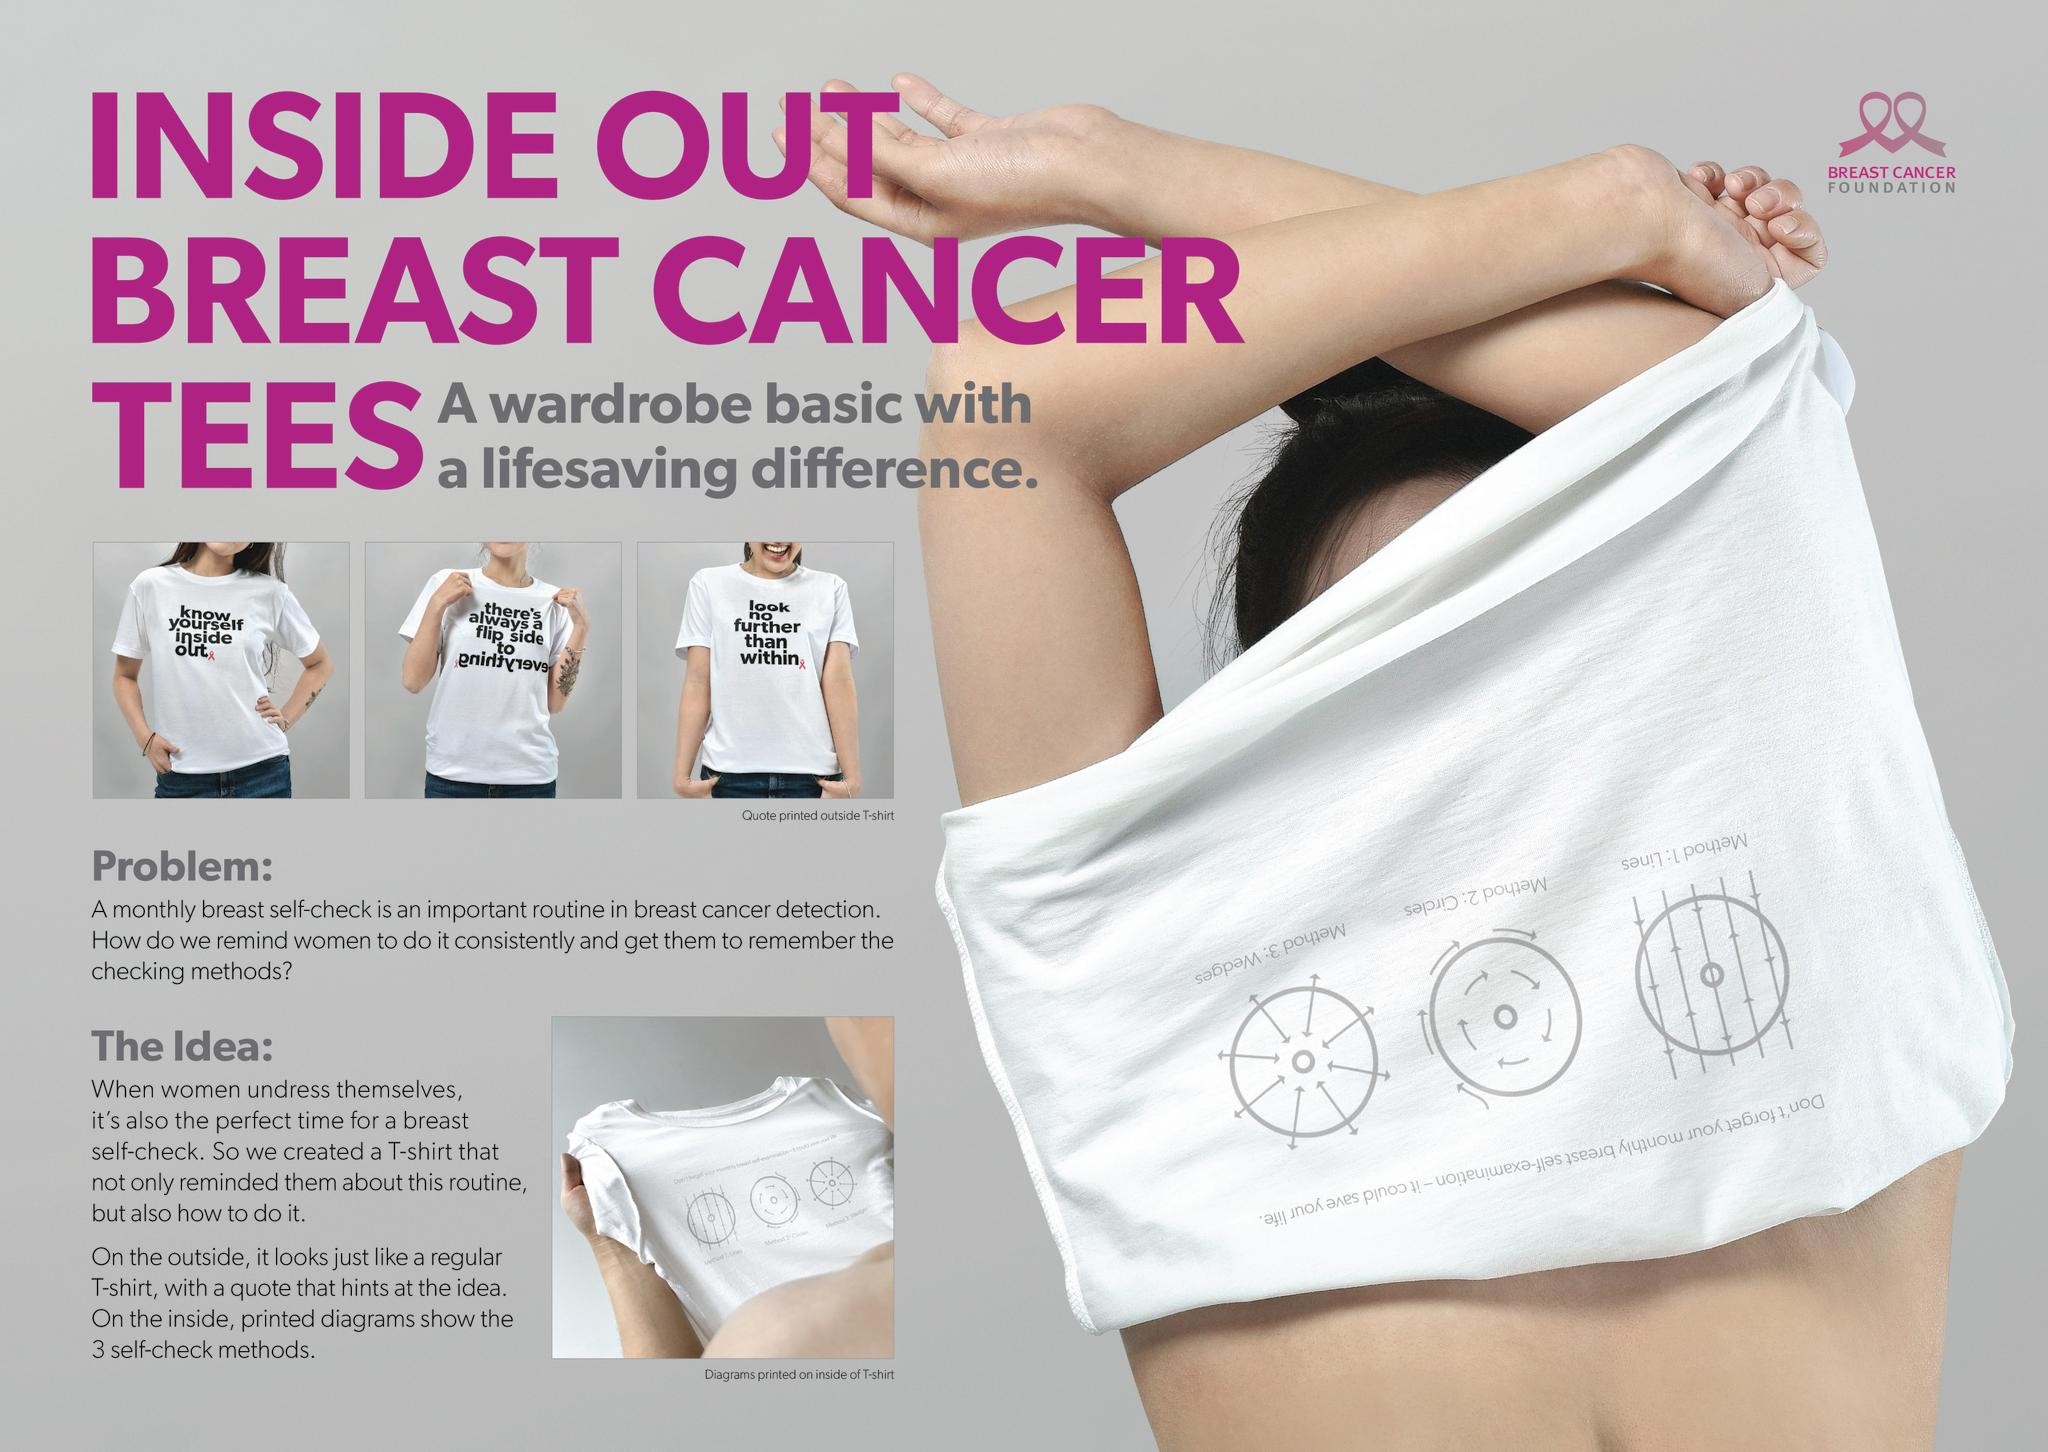 Inside Out Breast Cancer Tees